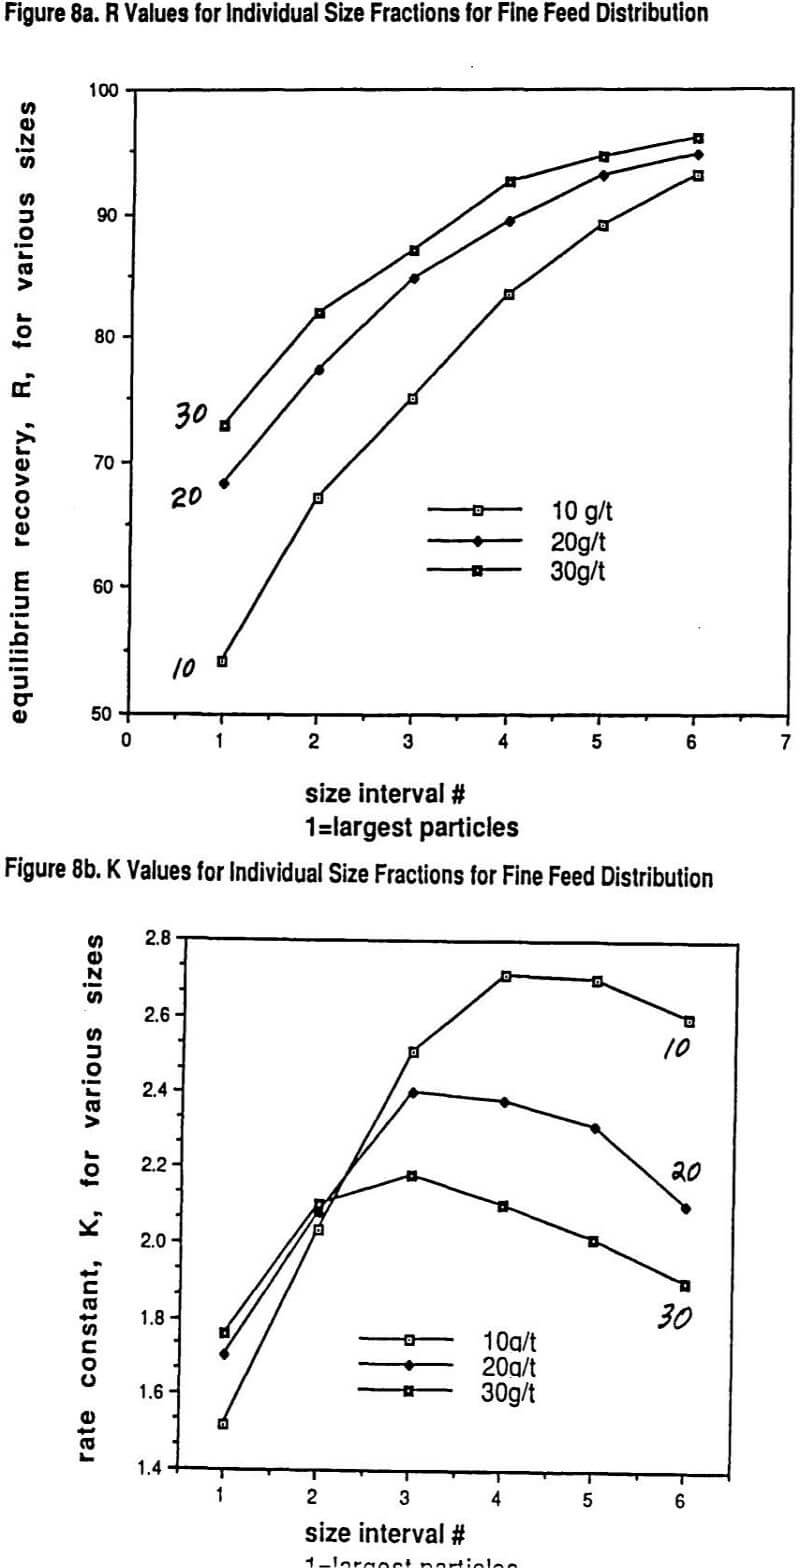 downstream froth flotation r values for individual size fractions for fine feed distribution